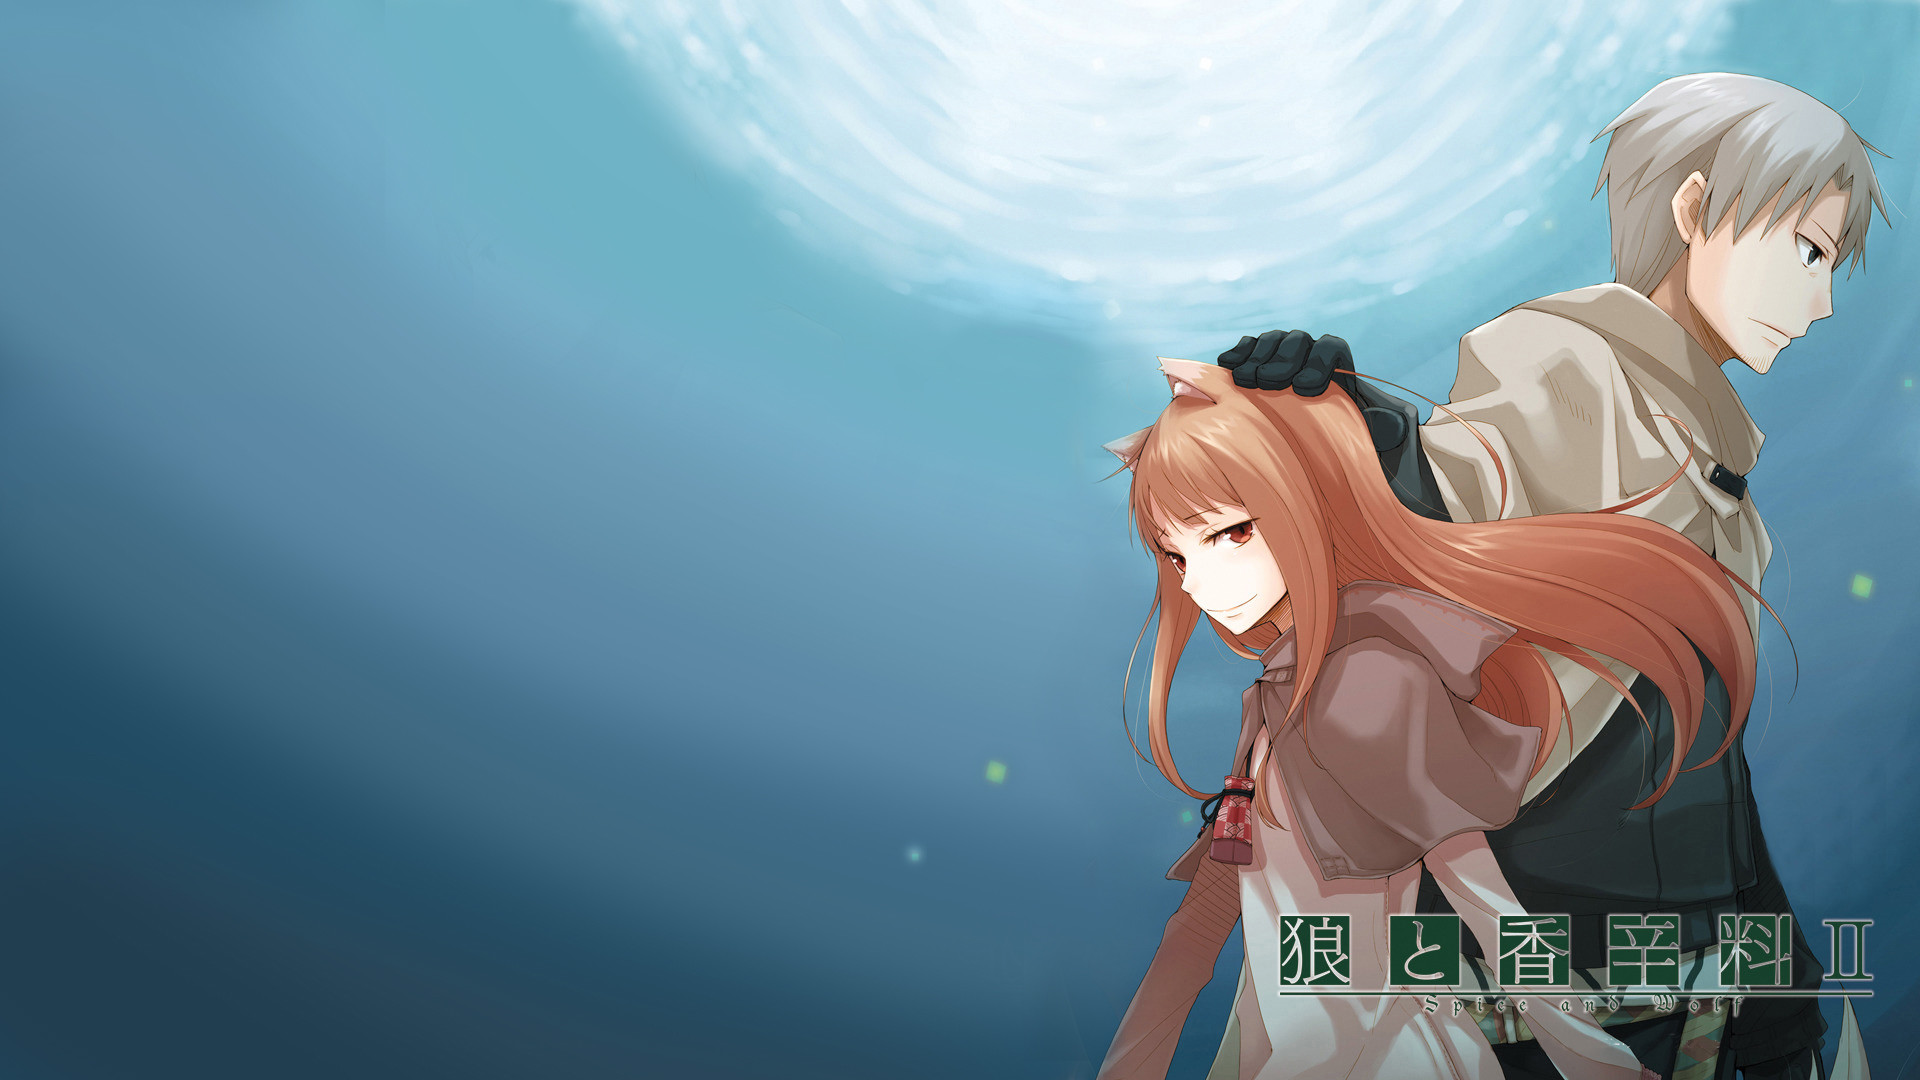 1920x1080 Spice and Wolf wallpaper